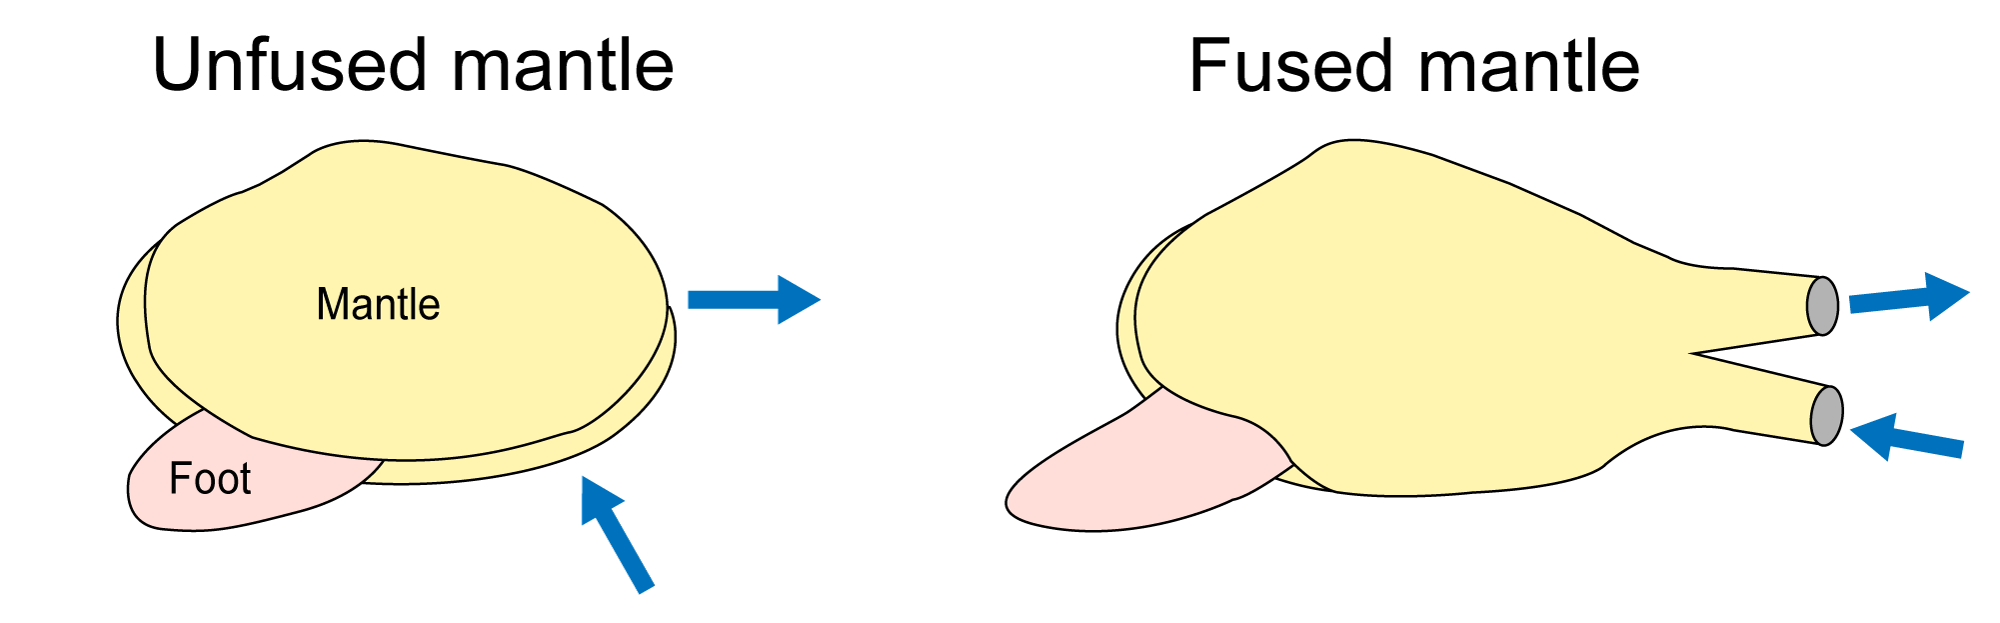 Diagram showing how mantle fusion forms siphons in some bivalves.